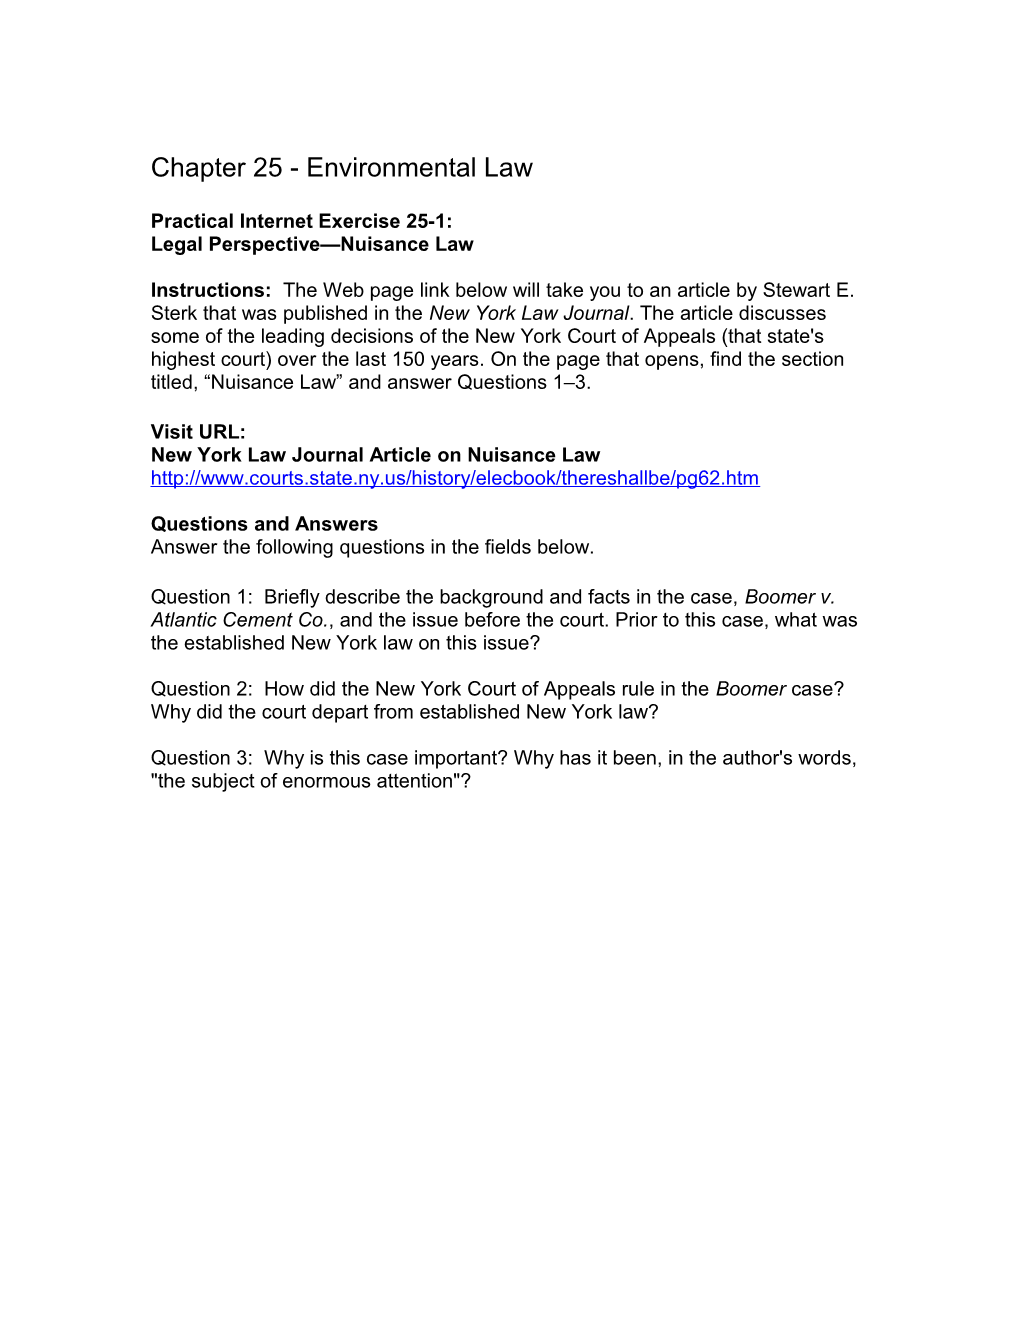 Chapter 44 - Consumer and Environmental Law